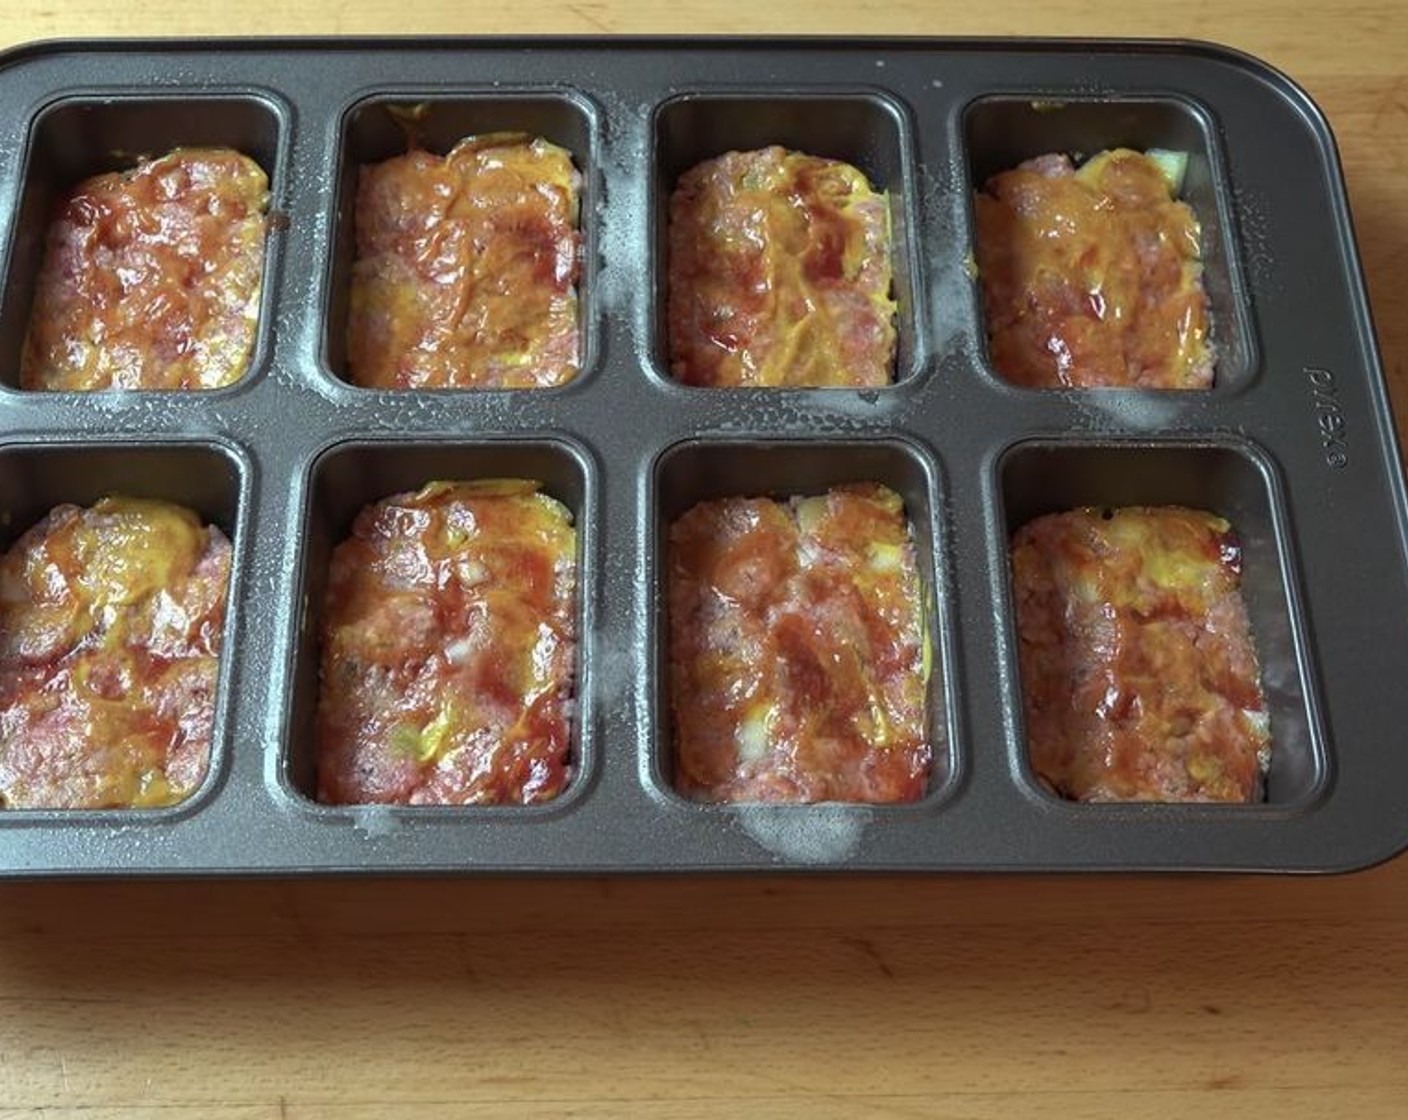 step 5 On top of each mini meatloaf, add Ketchup (to taste) and Yellow Mustard (to taste). Spread over the surface.